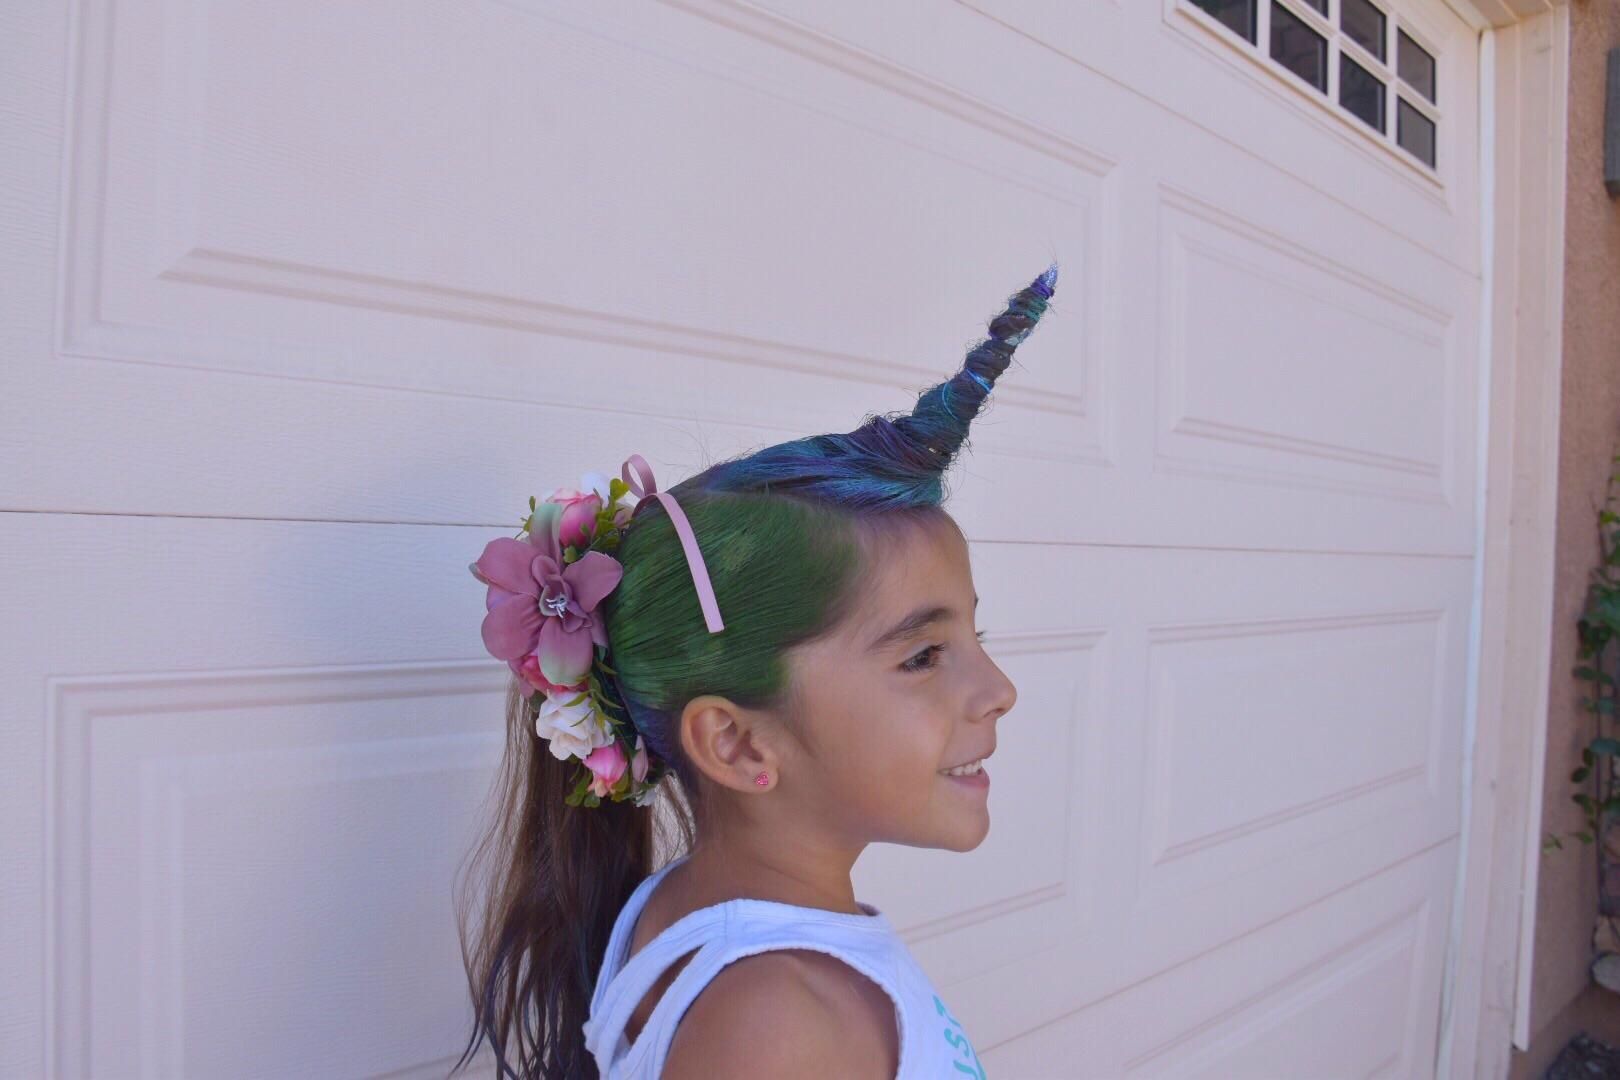 Not to be outdone. My niece was a unicorn for crazy hair day 10/6/2017.